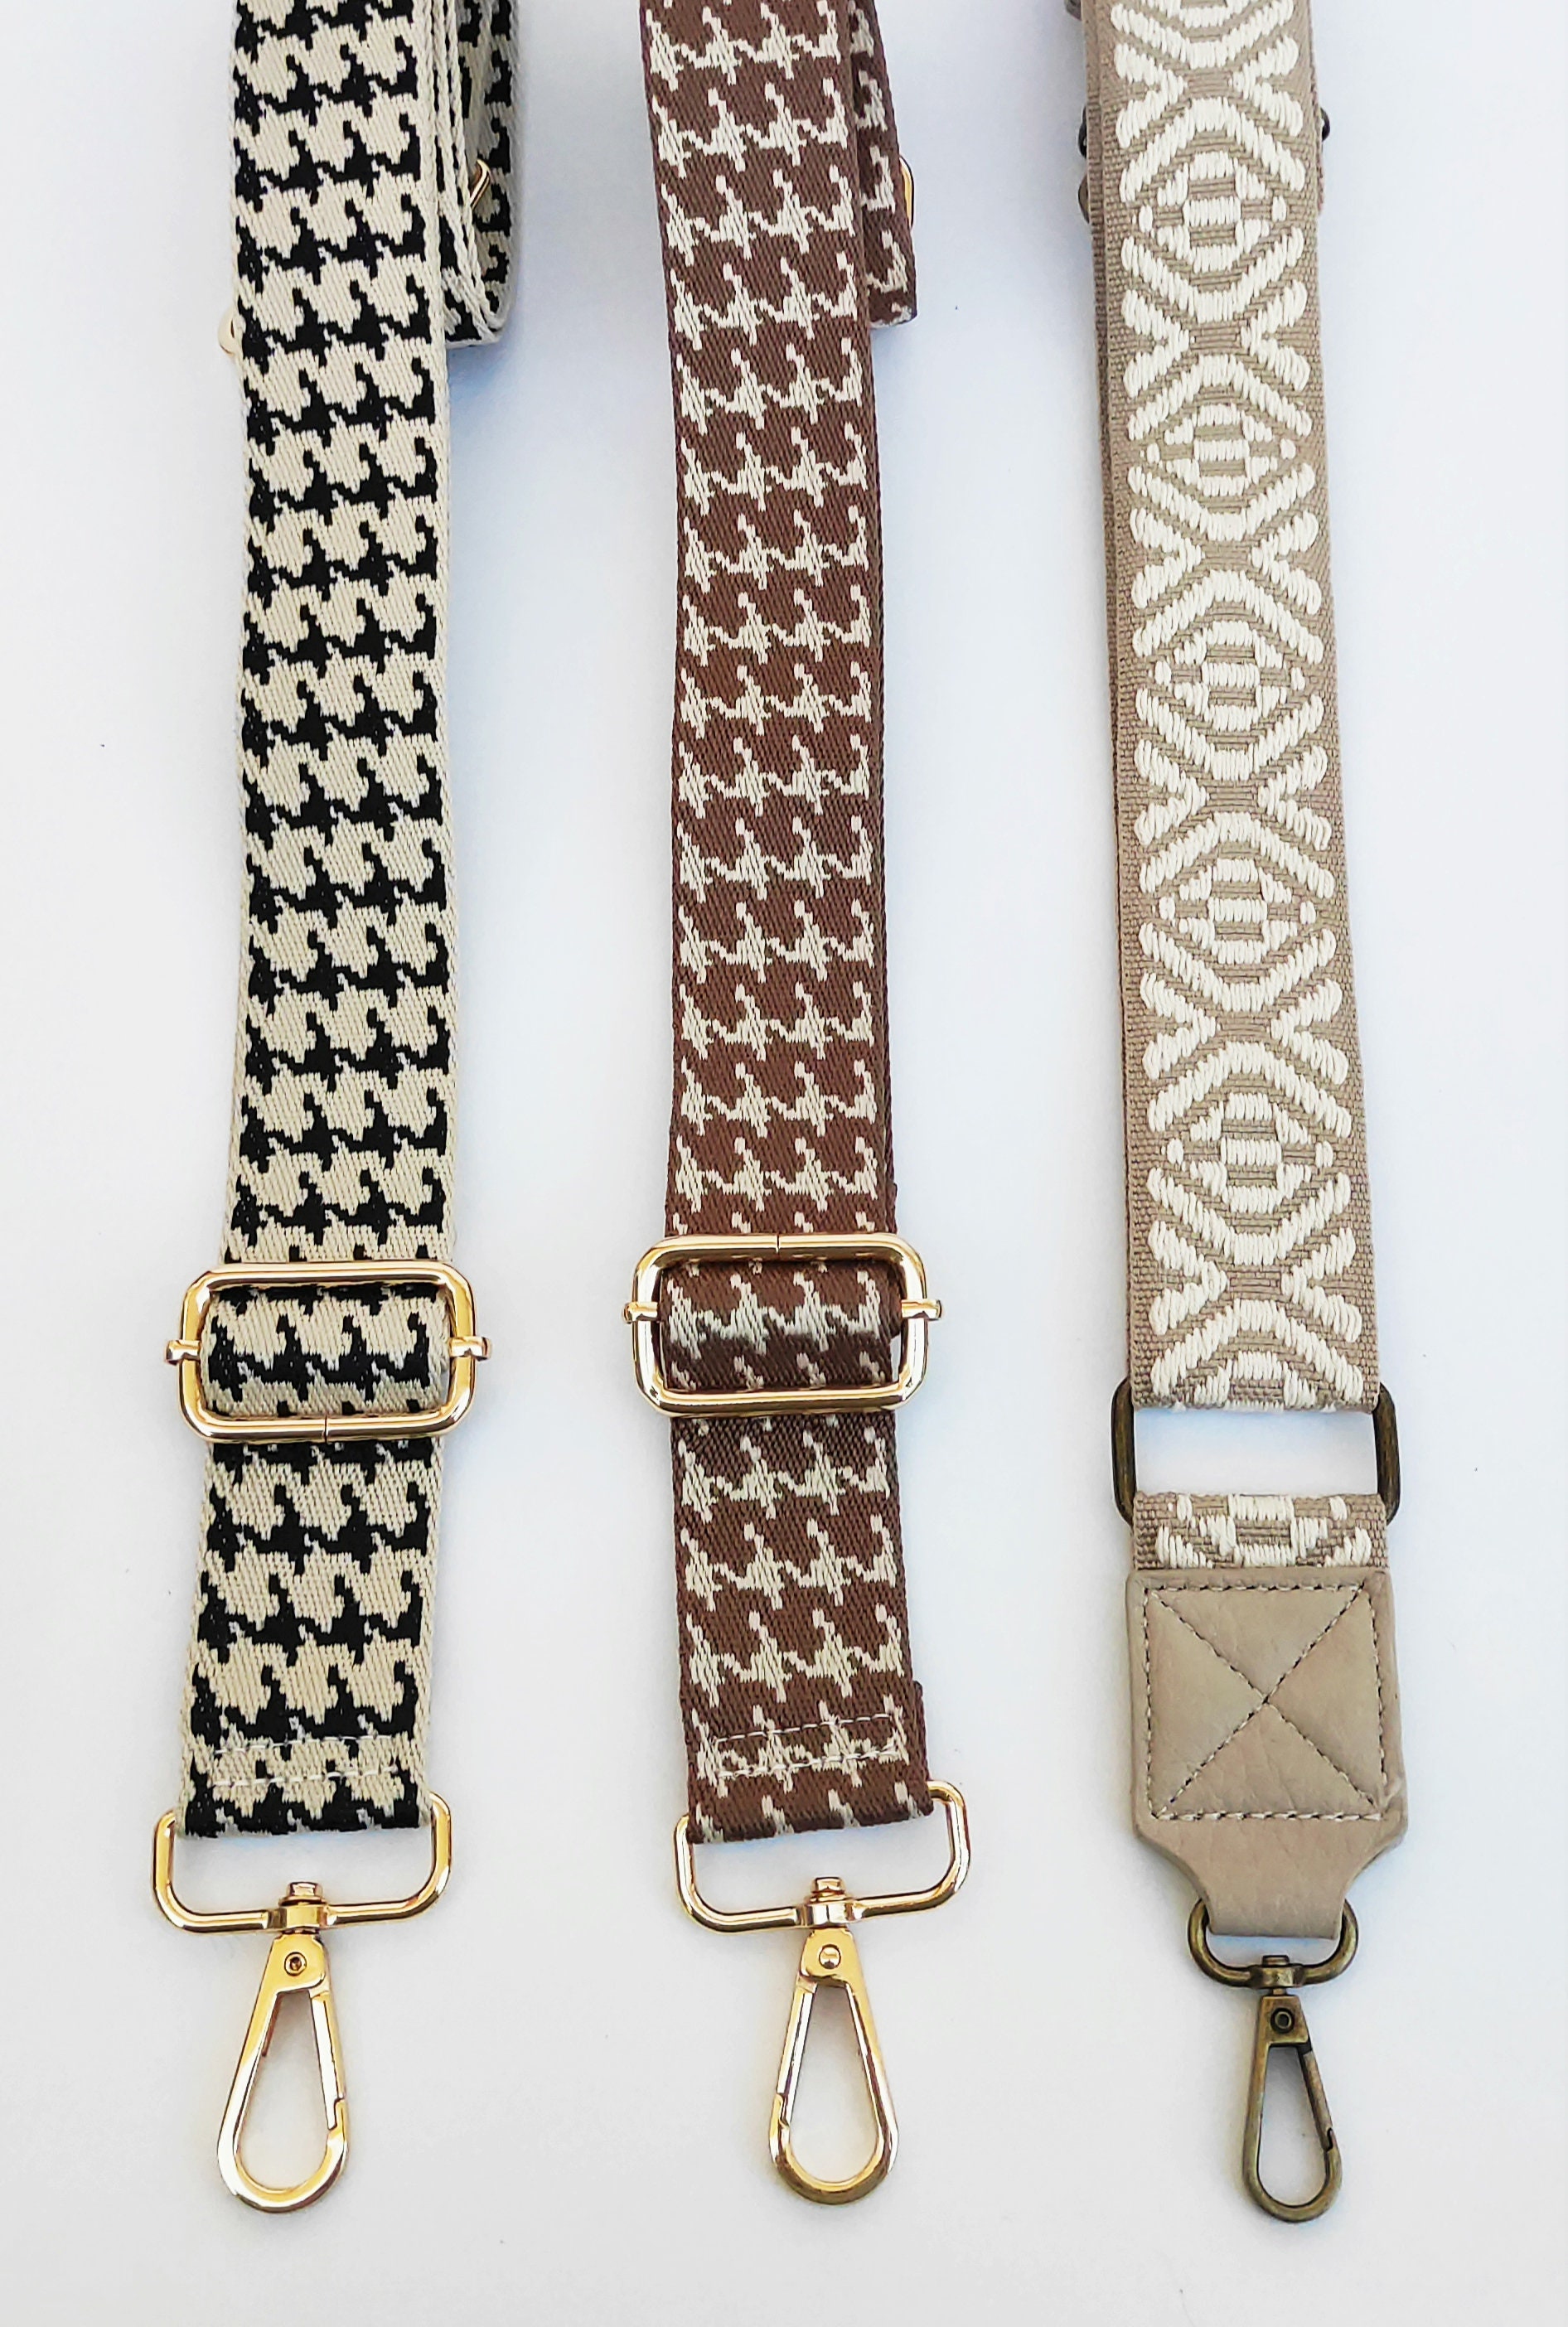 Straps for Bags. Choose the Ones You Like. Bag Lash 